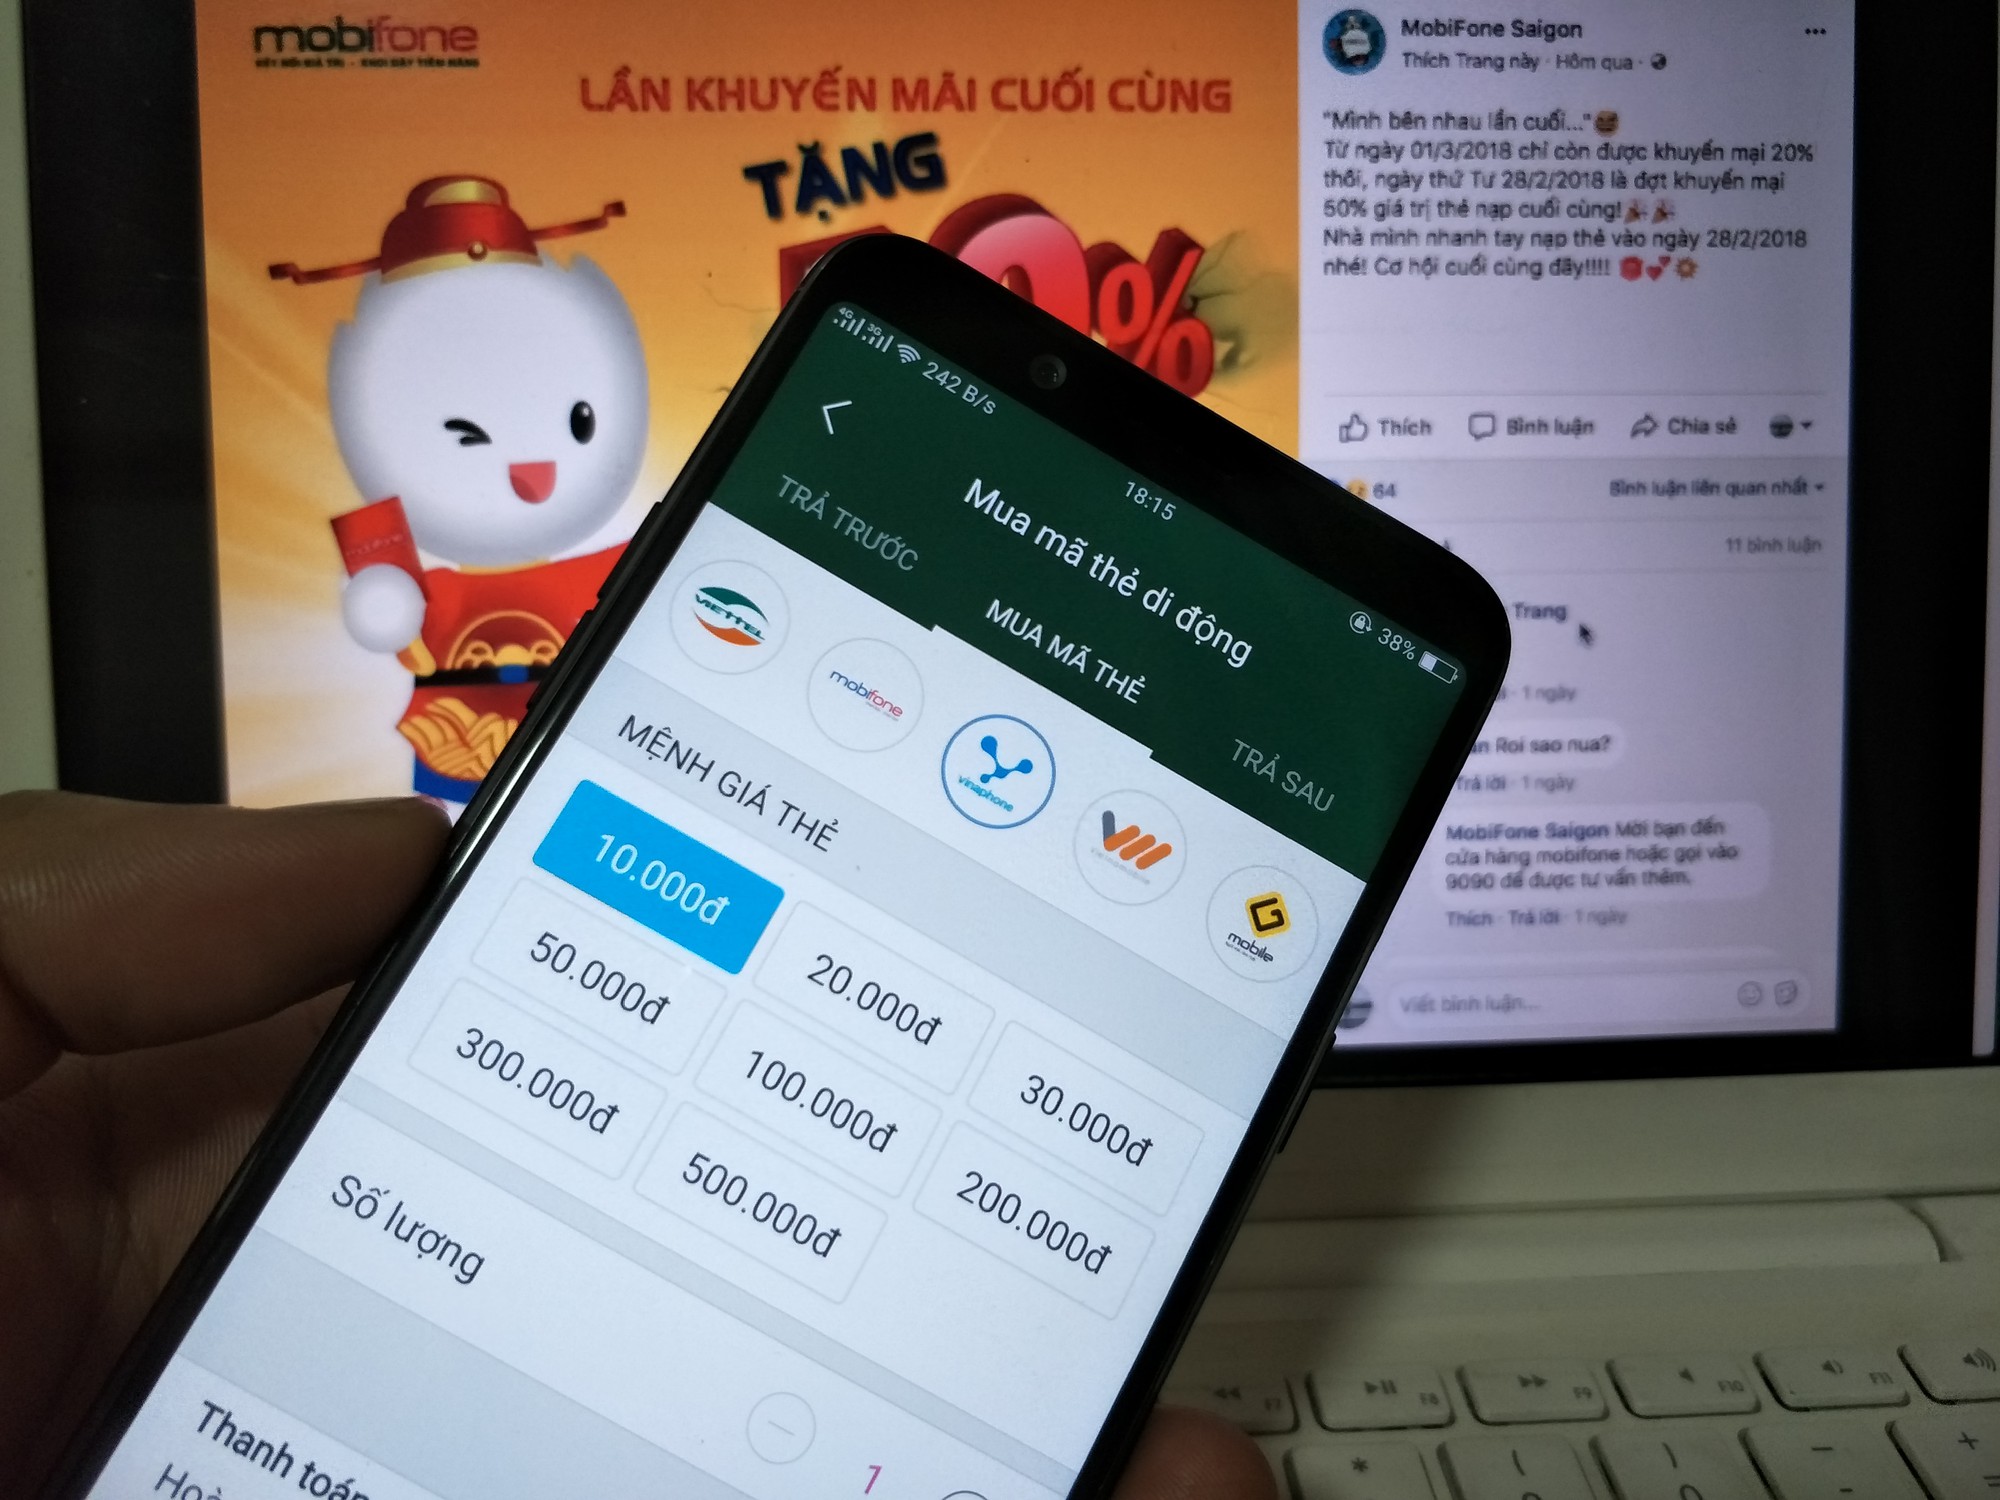 ​Vietnam networks jammed as users go ‘all-in’ on last day of 50% top-up bonus